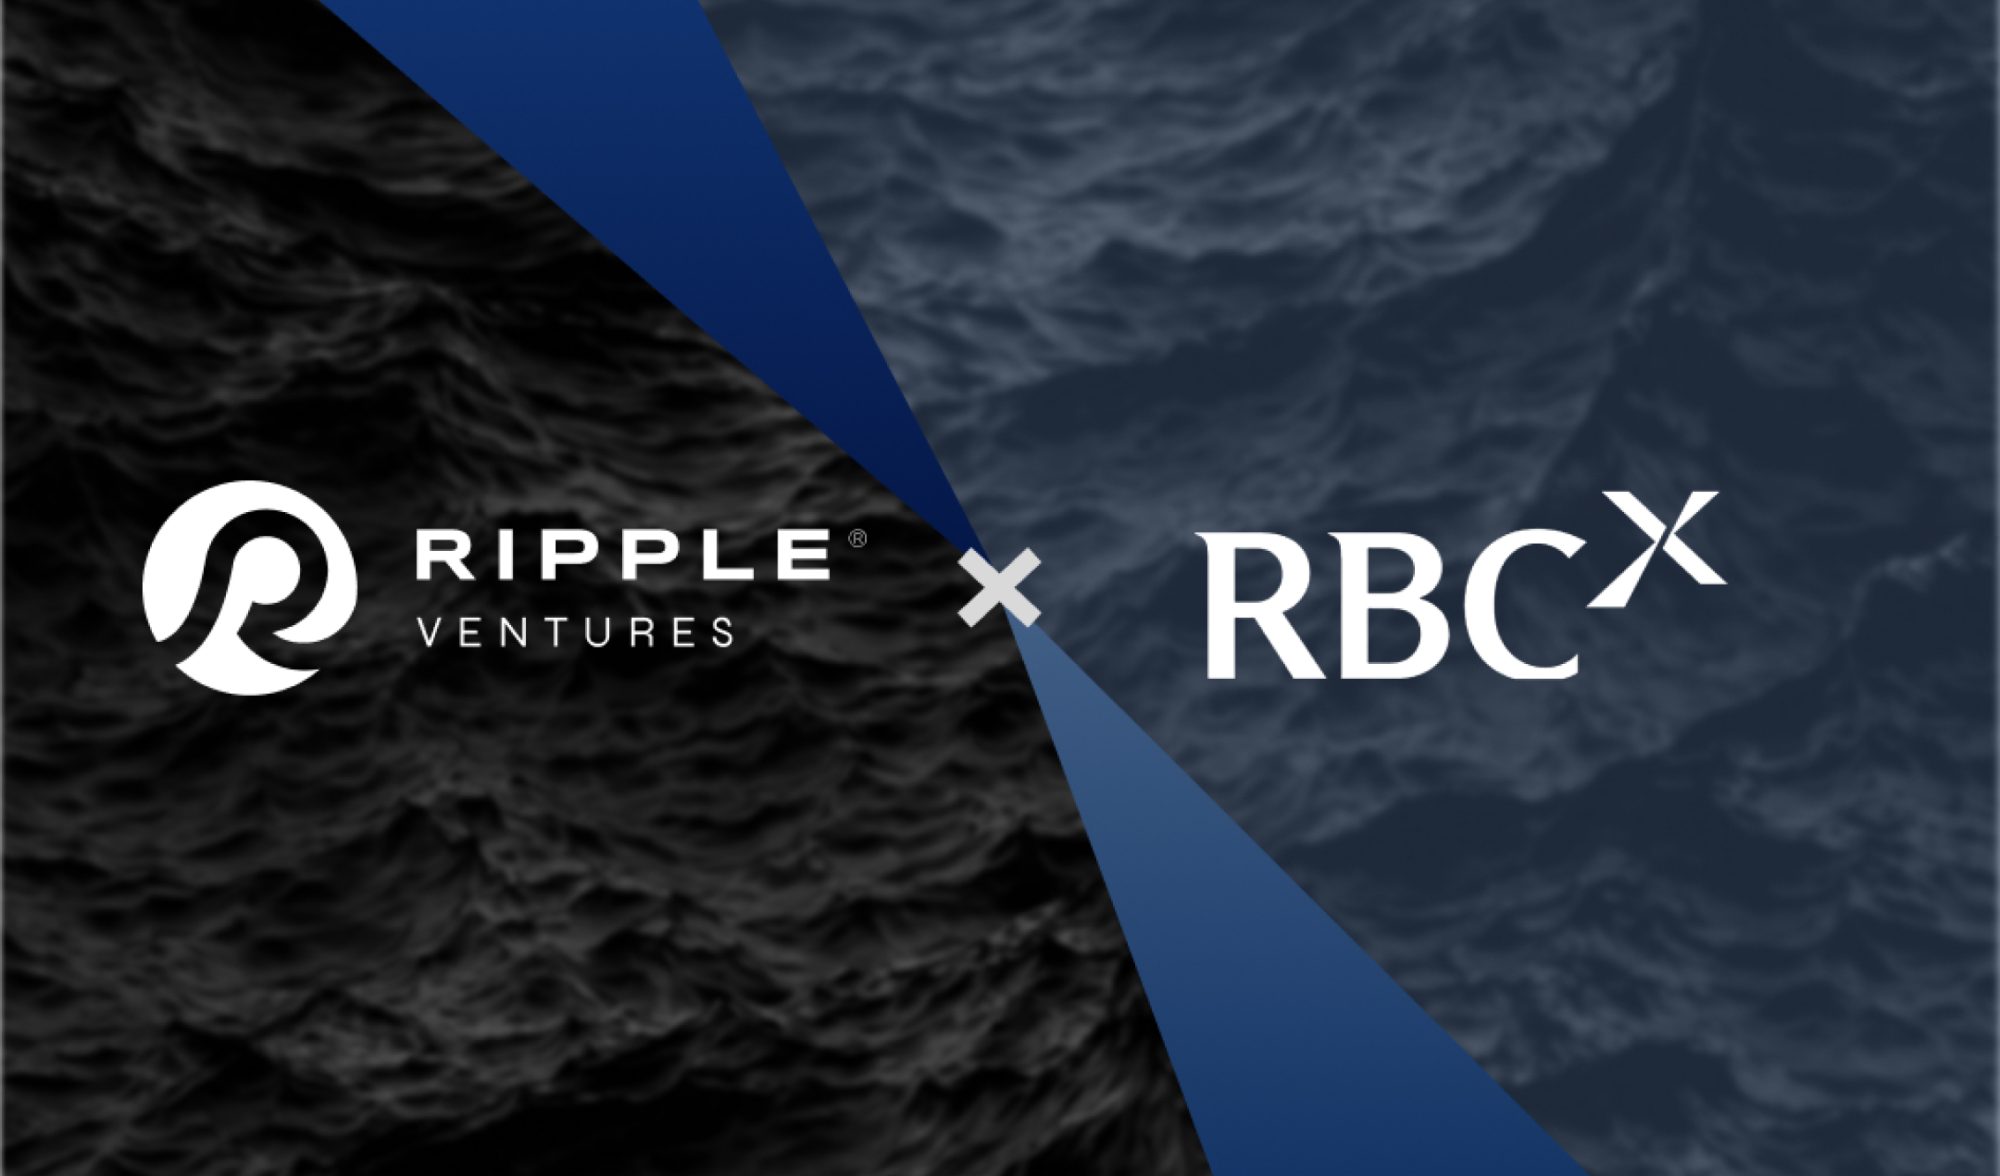 Royal Bank of Canada Partners with Ripple Ventures to Support Underrepresented Students Looking to Become Founders and Funders